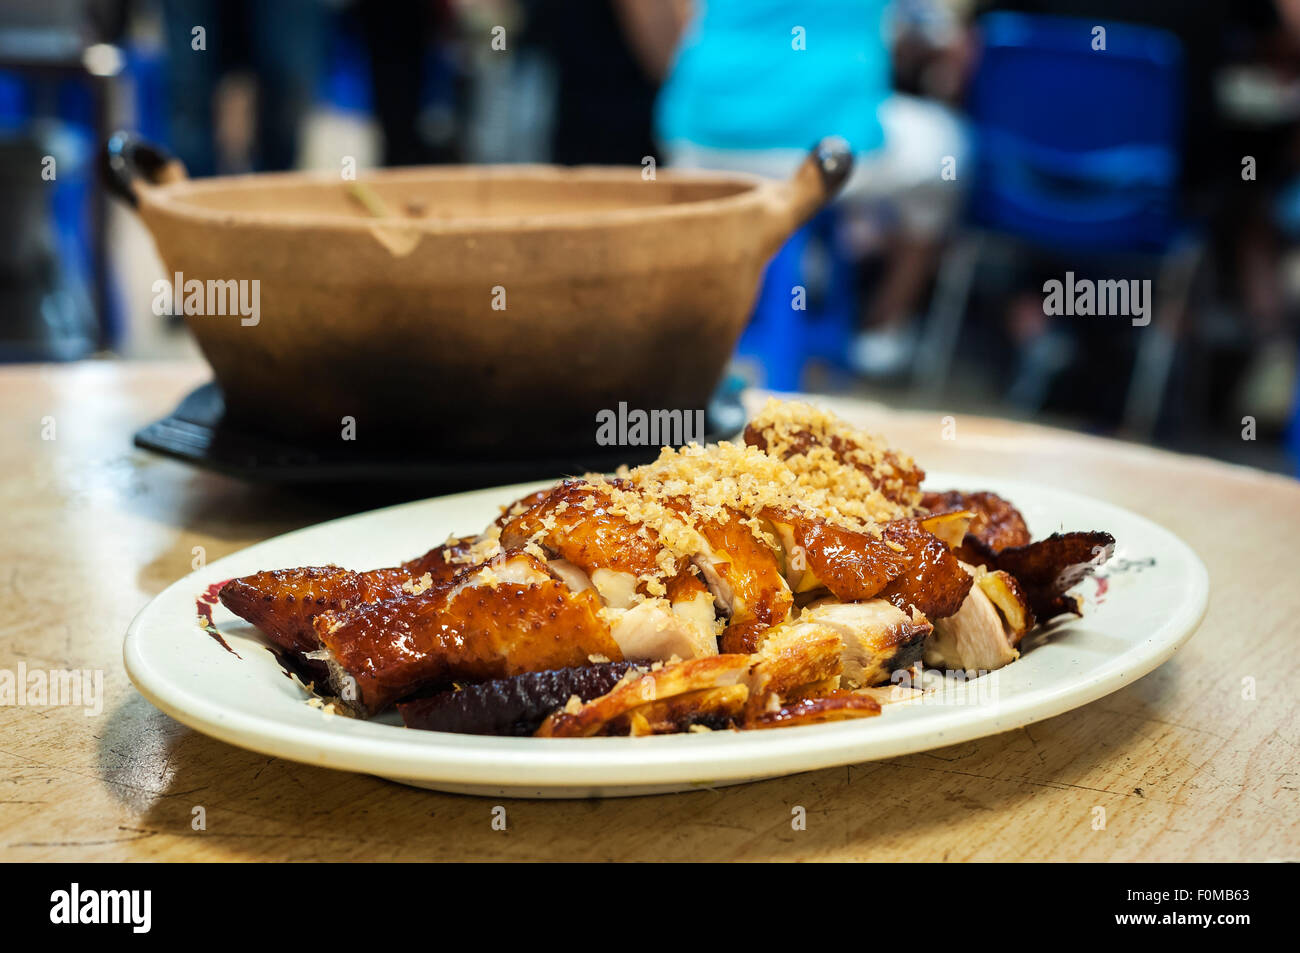 Classic roasted chicken topped with garlic served at a Hong Kong restaurant Stock Photo